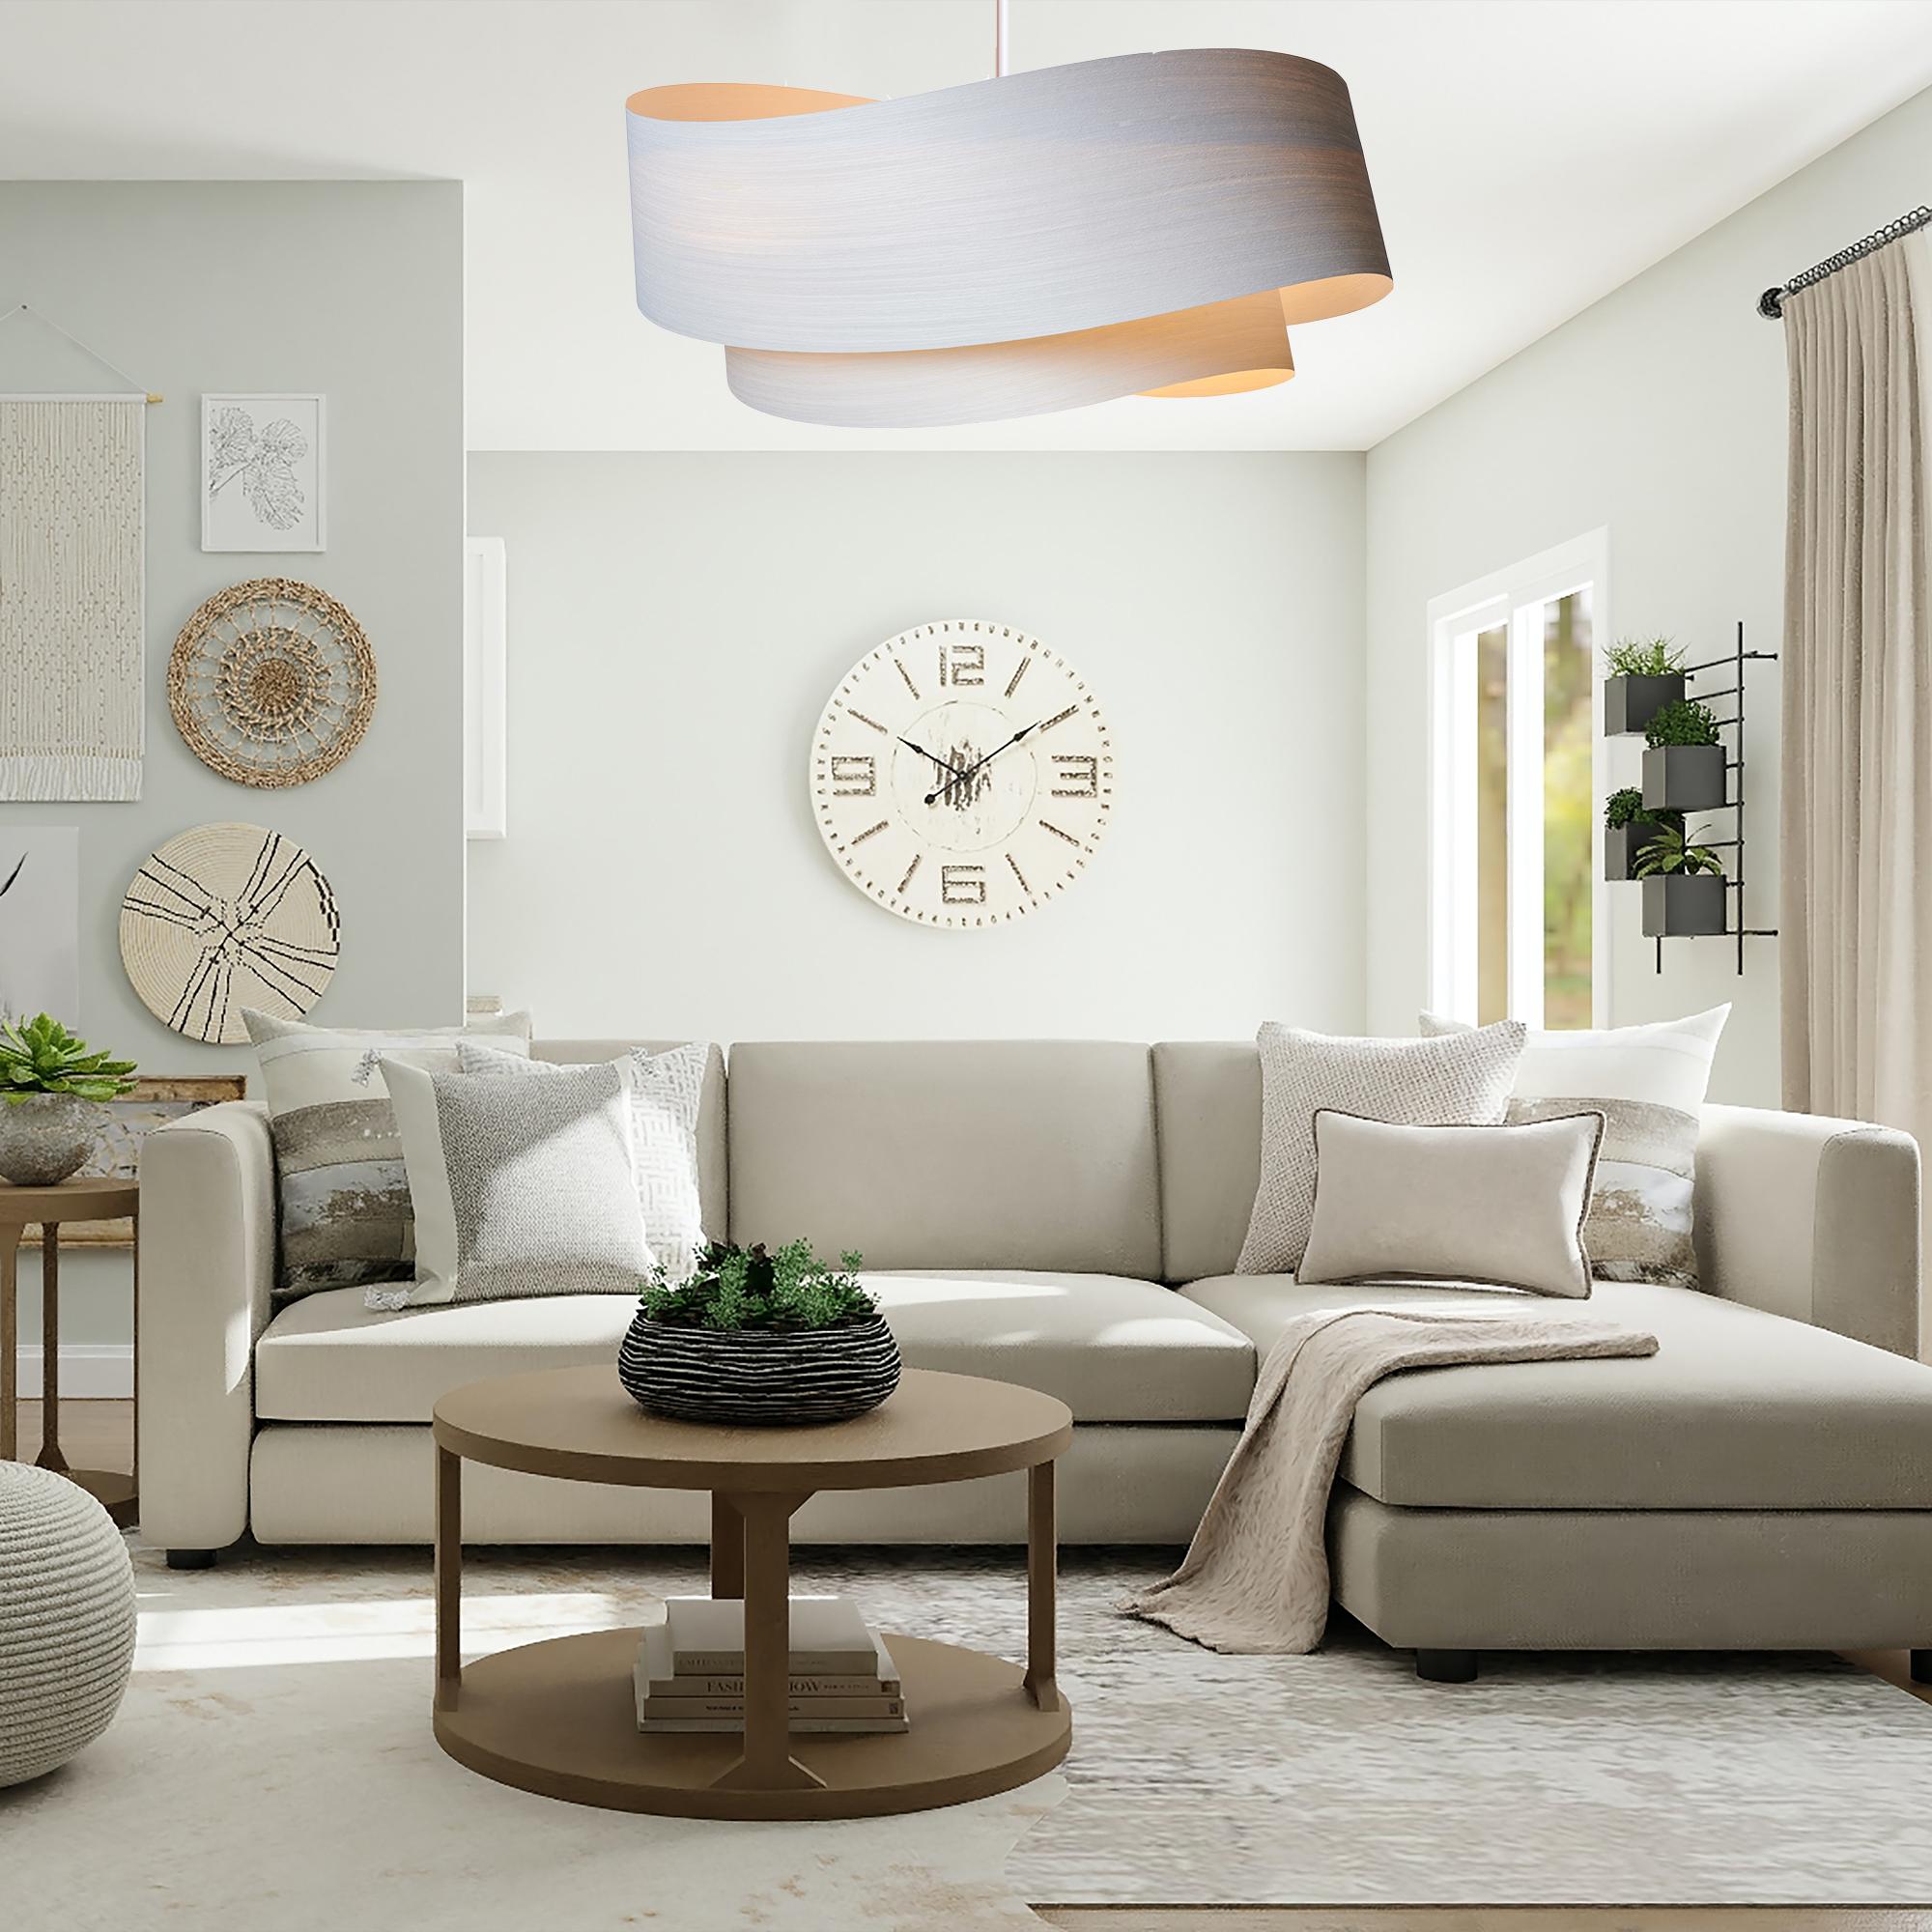 This stunning White ECO wood veneer pendant light is the perfect way to add a touch of nature and elegance to your home. Handcrafted from the finest White ECO wood veneer, each light is a unique work of art.

White ECO wood veneer is a premium